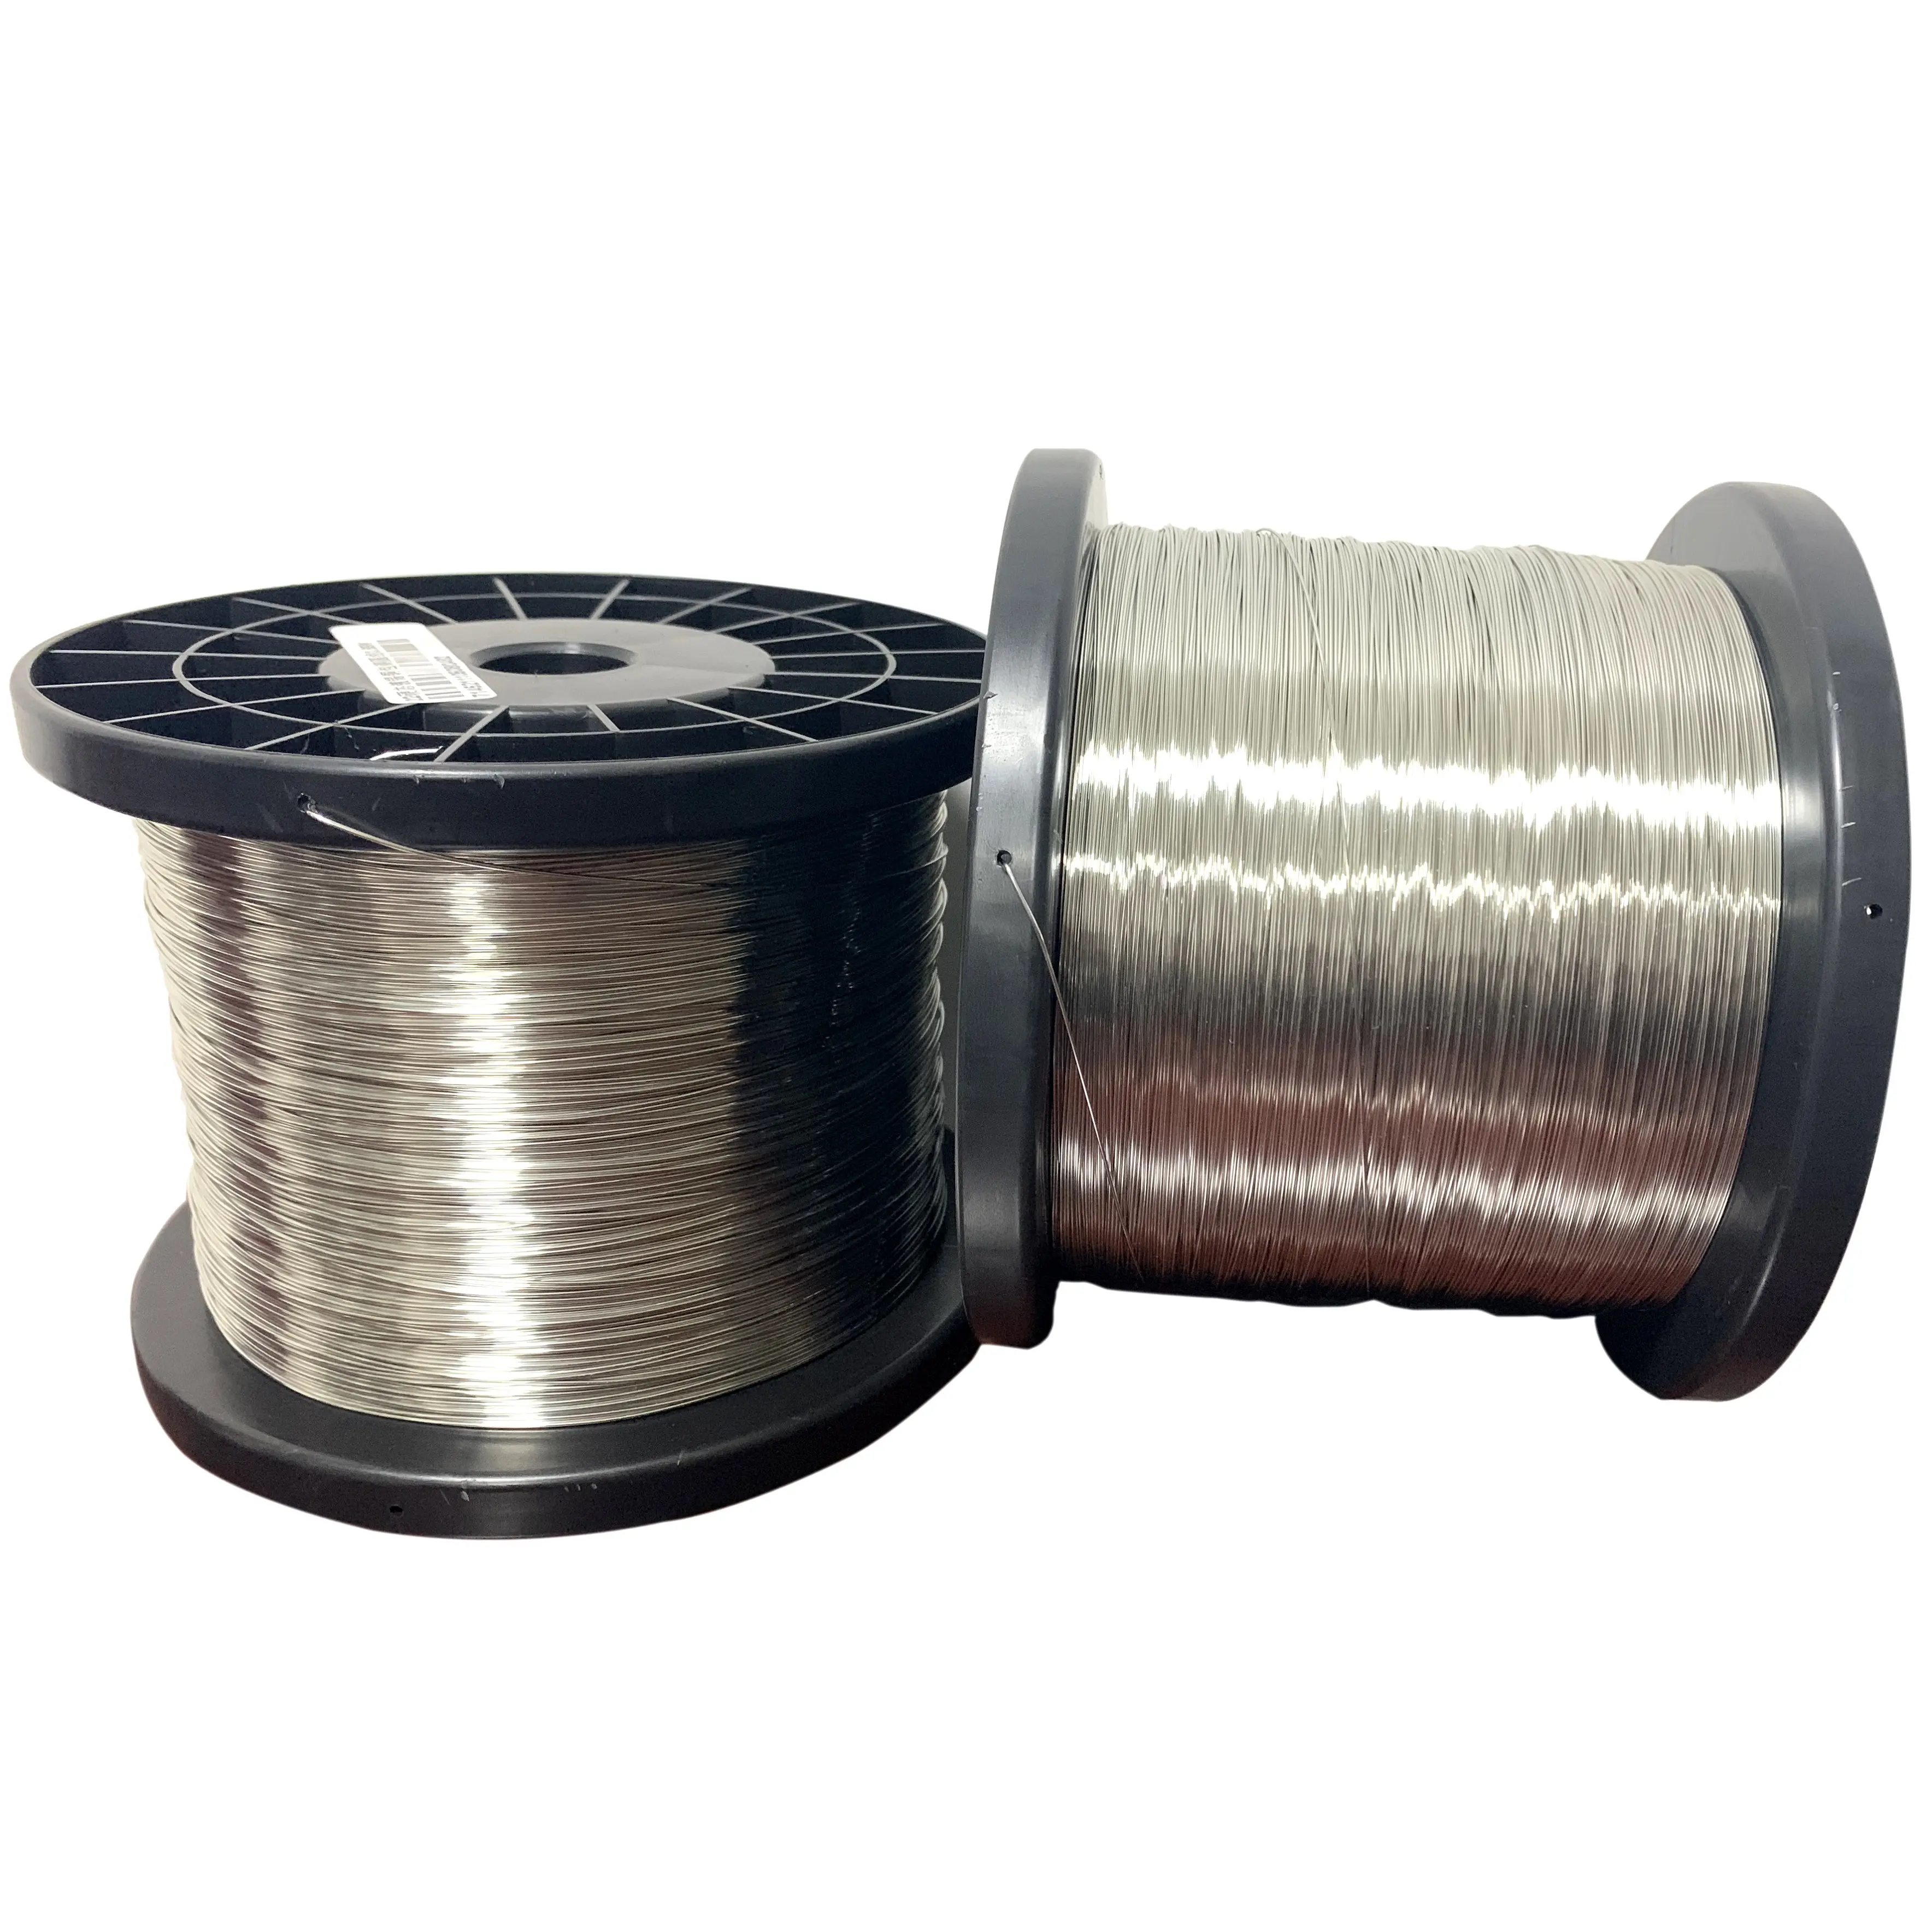 Electroplating Tin Plated Coil Cookie Steel Wire Copper 99.9% Pure Ccs Transformer Cable